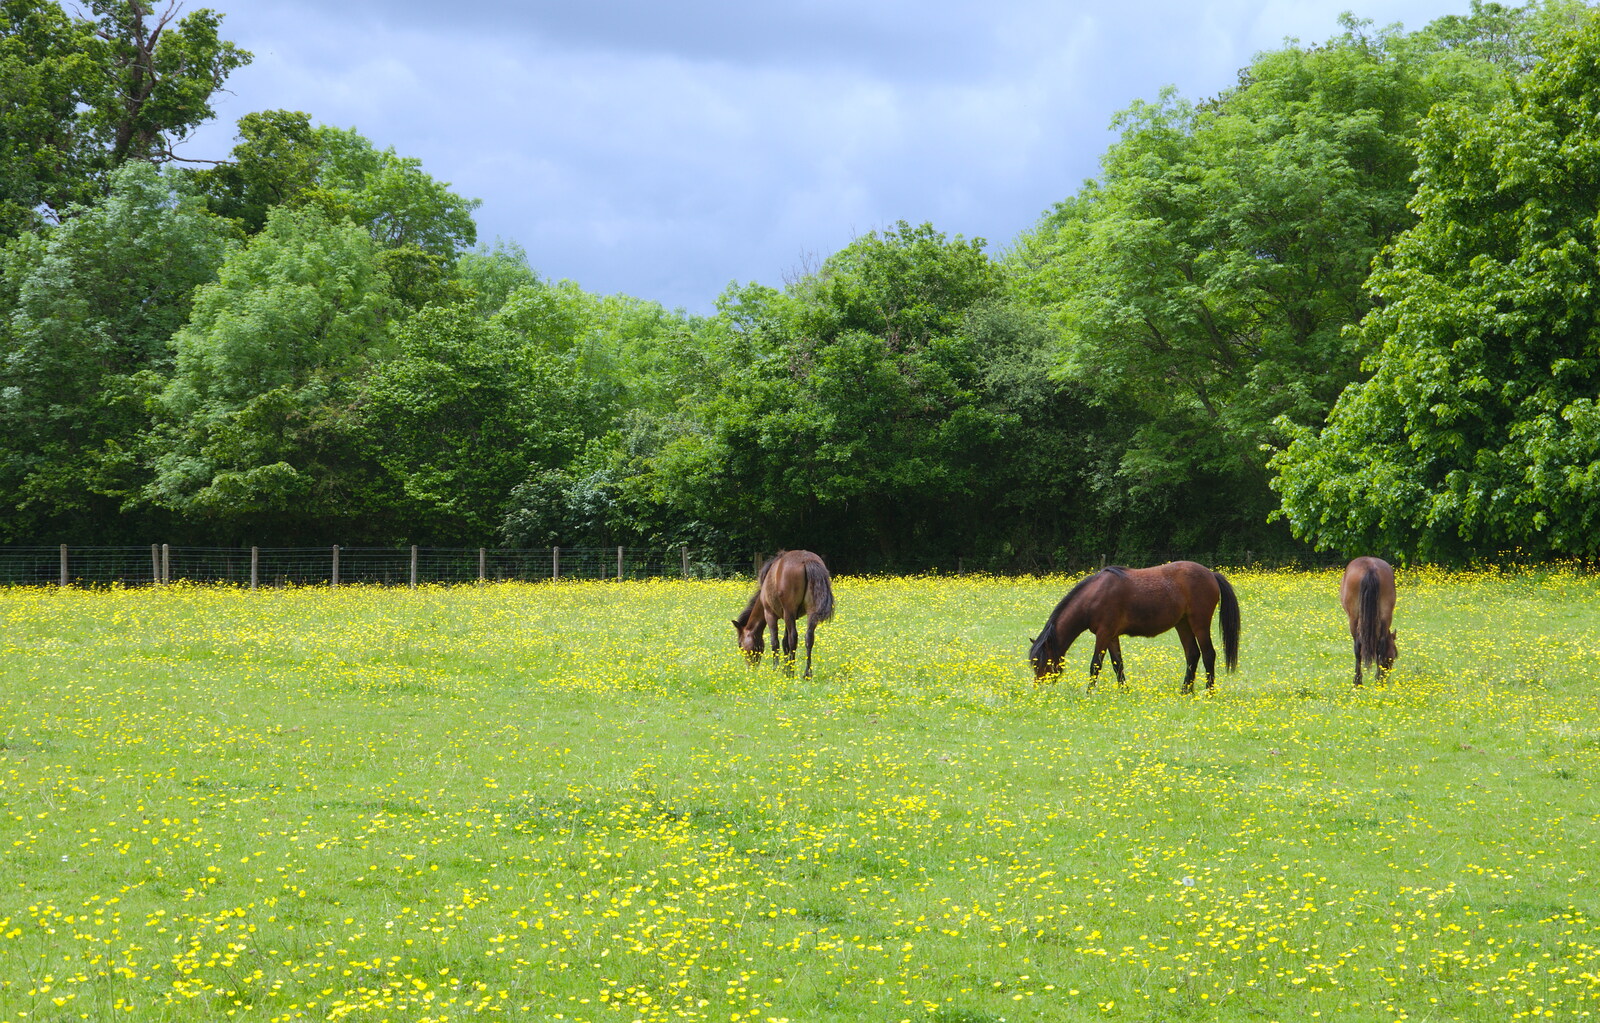 More horses in a field of buttercups from Chagford Lido and a Trip to Parke, Bovey Tracey, Devon - 25th May 2019